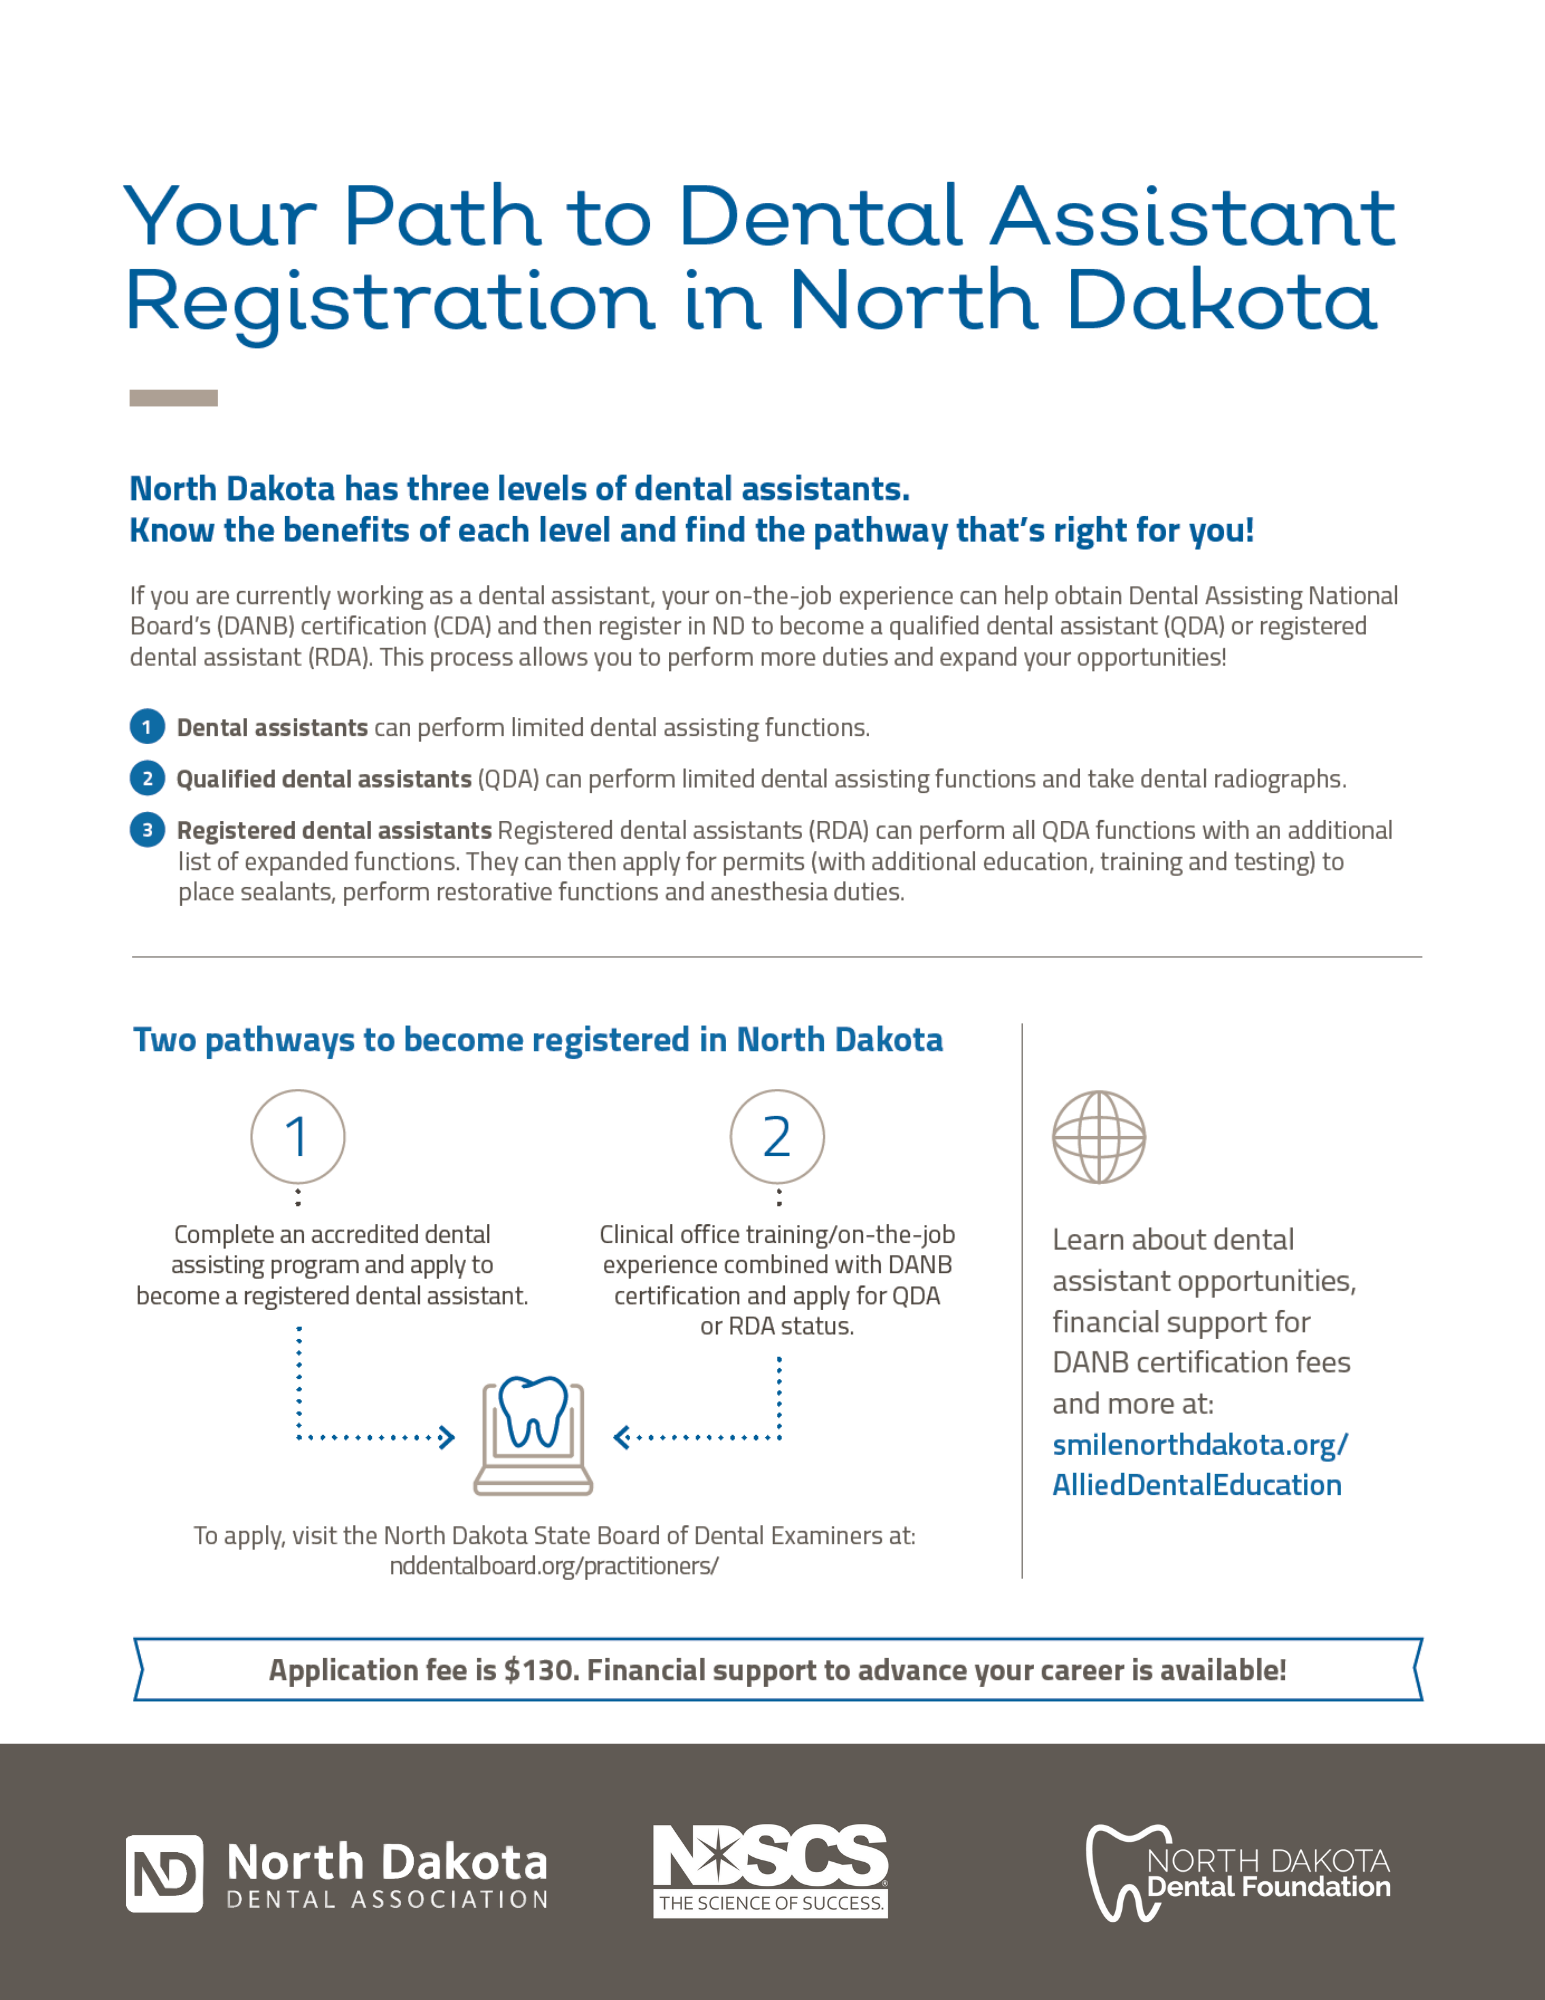 Your path to dental assistant registration - FLYER (1)